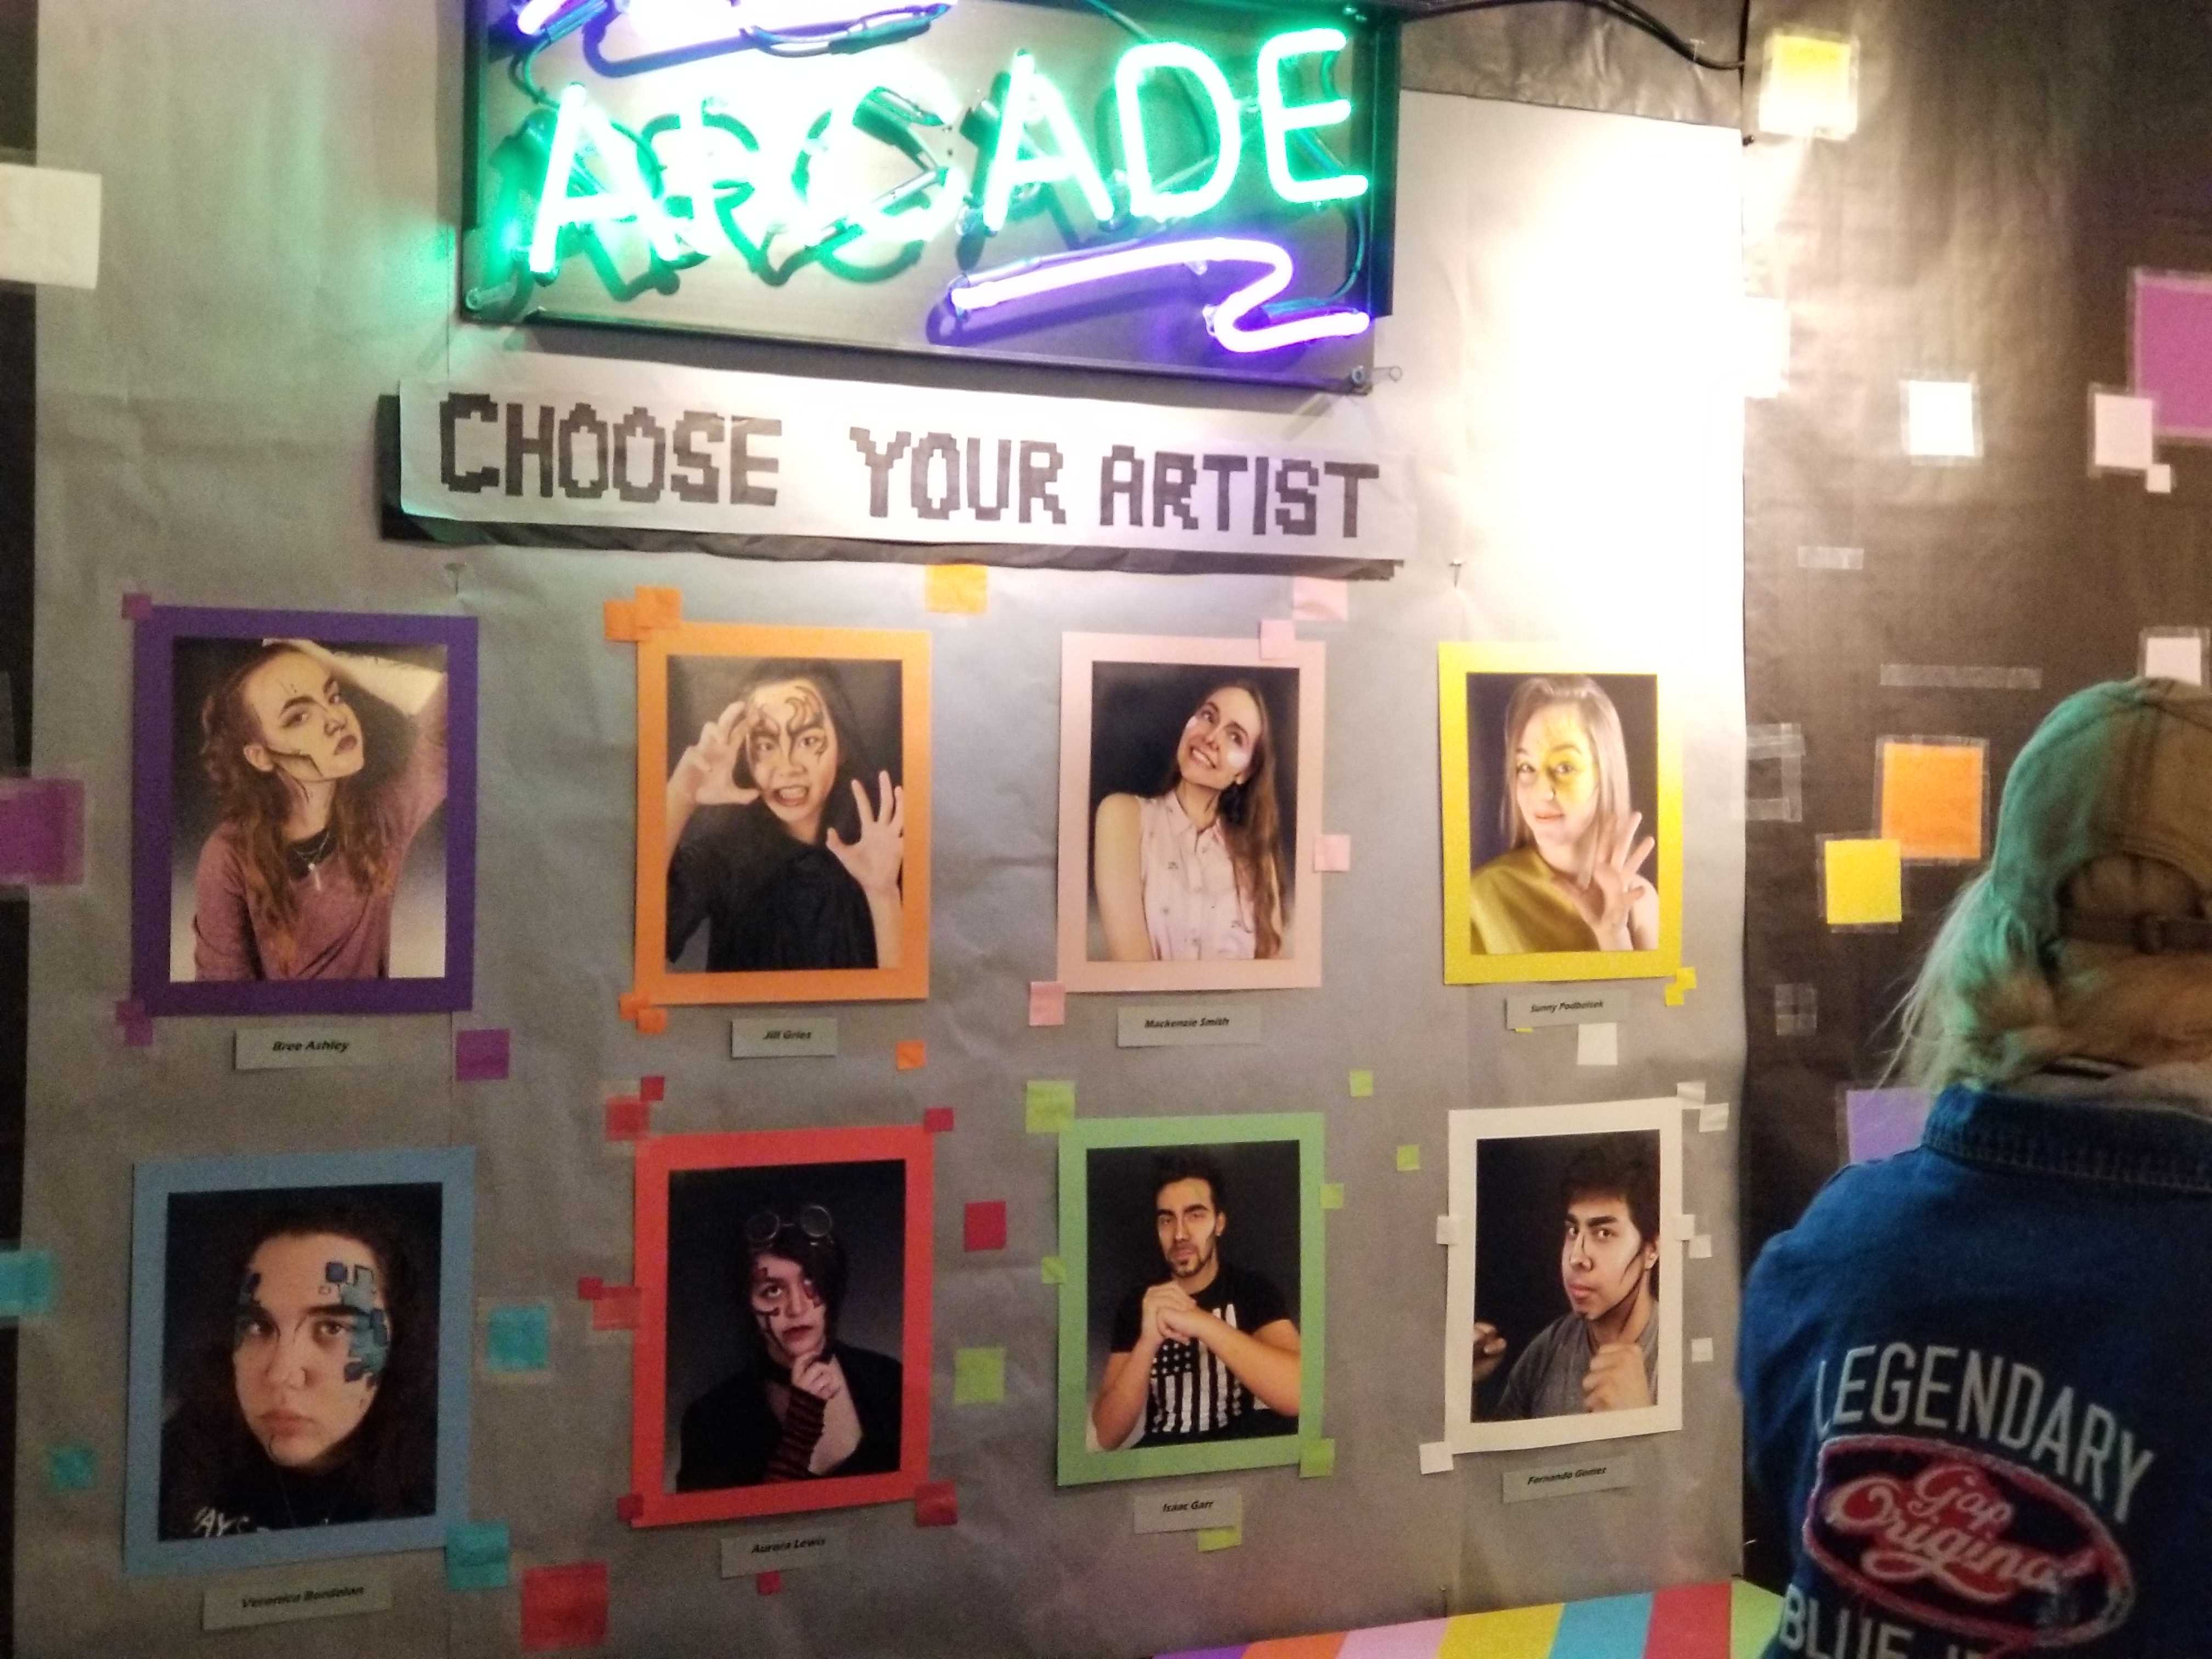 The Beyonce wall features the artists included in the Arcade senior art show Mar. 8, 2018